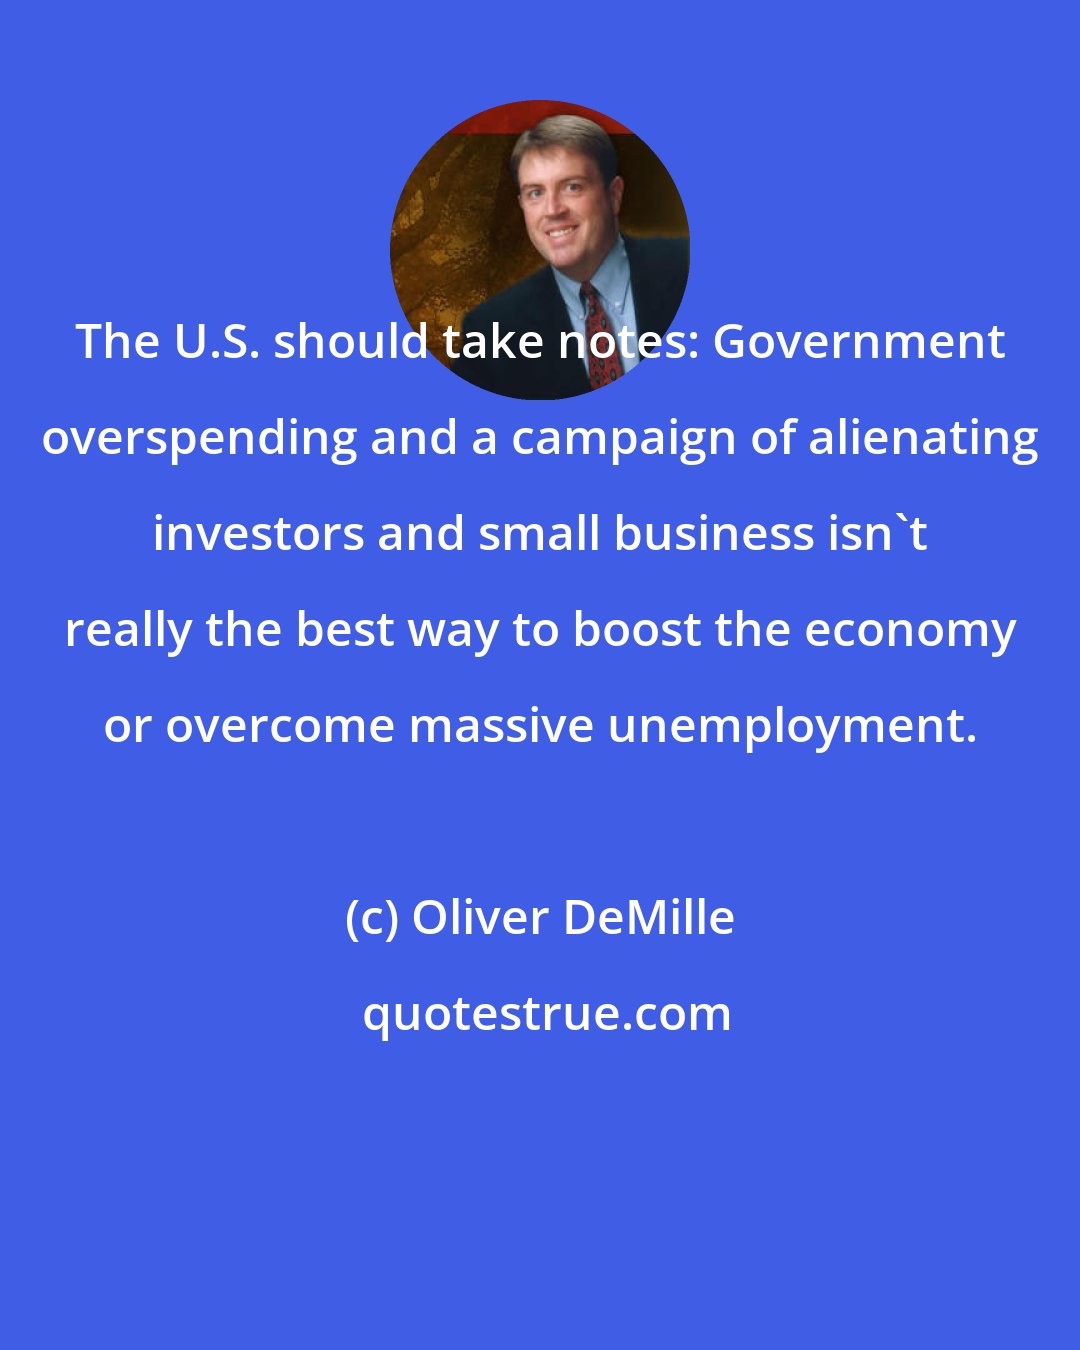 Oliver DeMille: The U.S. should take notes: Government overspending and a campaign of alienating investors and small business isn't really the best way to boost the economy or overcome massive unemployment.